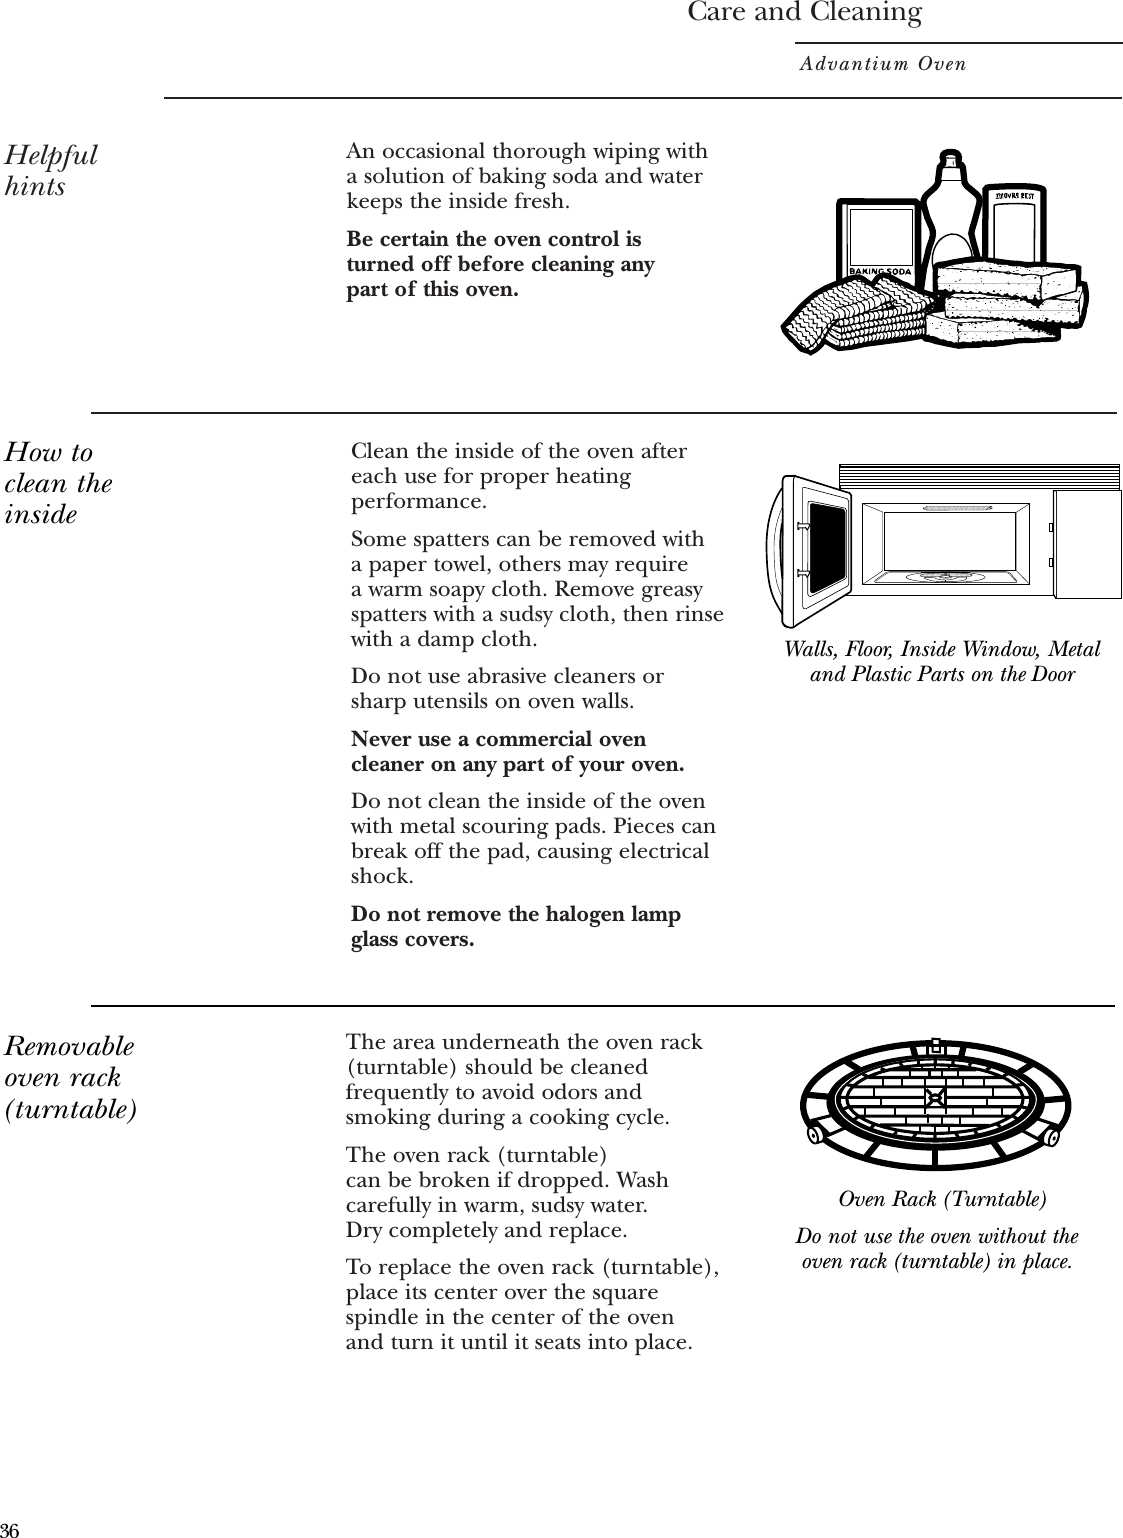 The area underneath the oven rack(turntable) should be cleanedfrequently to avoid odors andsmoking during a cooking cycle. The oven rack (turntable) can be broken if dropped. Washcarefully in warm, sudsy water. Dry completely and replace. To replace the oven rack (turntable),place its center over the squarespindle in the center of the oven and turn it until it seats into place.Care and CleaningAdvantium OvenHelpfulhintsClean the inside of the oven aftereach use for proper heatingperformance.Some spatters can be removed with a paper towel, others may require a warm soapy cloth. Remove greasyspatters with a sudsy cloth, then rinsewith a damp cloth.Do not use abrasive cleaners orsharp utensils on oven walls. Never use a commercial ovencleaner on any part of your oven.Do not clean the inside of the ovenwith metal scouring pads. Pieces canbreak off the pad, causing electricalshock.Do not remove the halogen lampglass covers.An occasional thorough wiping witha solution of baking soda and waterkeeps the inside fresh. Be certain the oven control is turned off before cleaning any part of this oven.Walls, Floor, Inside Window, Metaland Plastic Parts on the DoorDo not use the oven without theoven rack (turntable) in place.How toclean theinsideRemovableoven rack(turntable)Oven Rack (Turntable)36